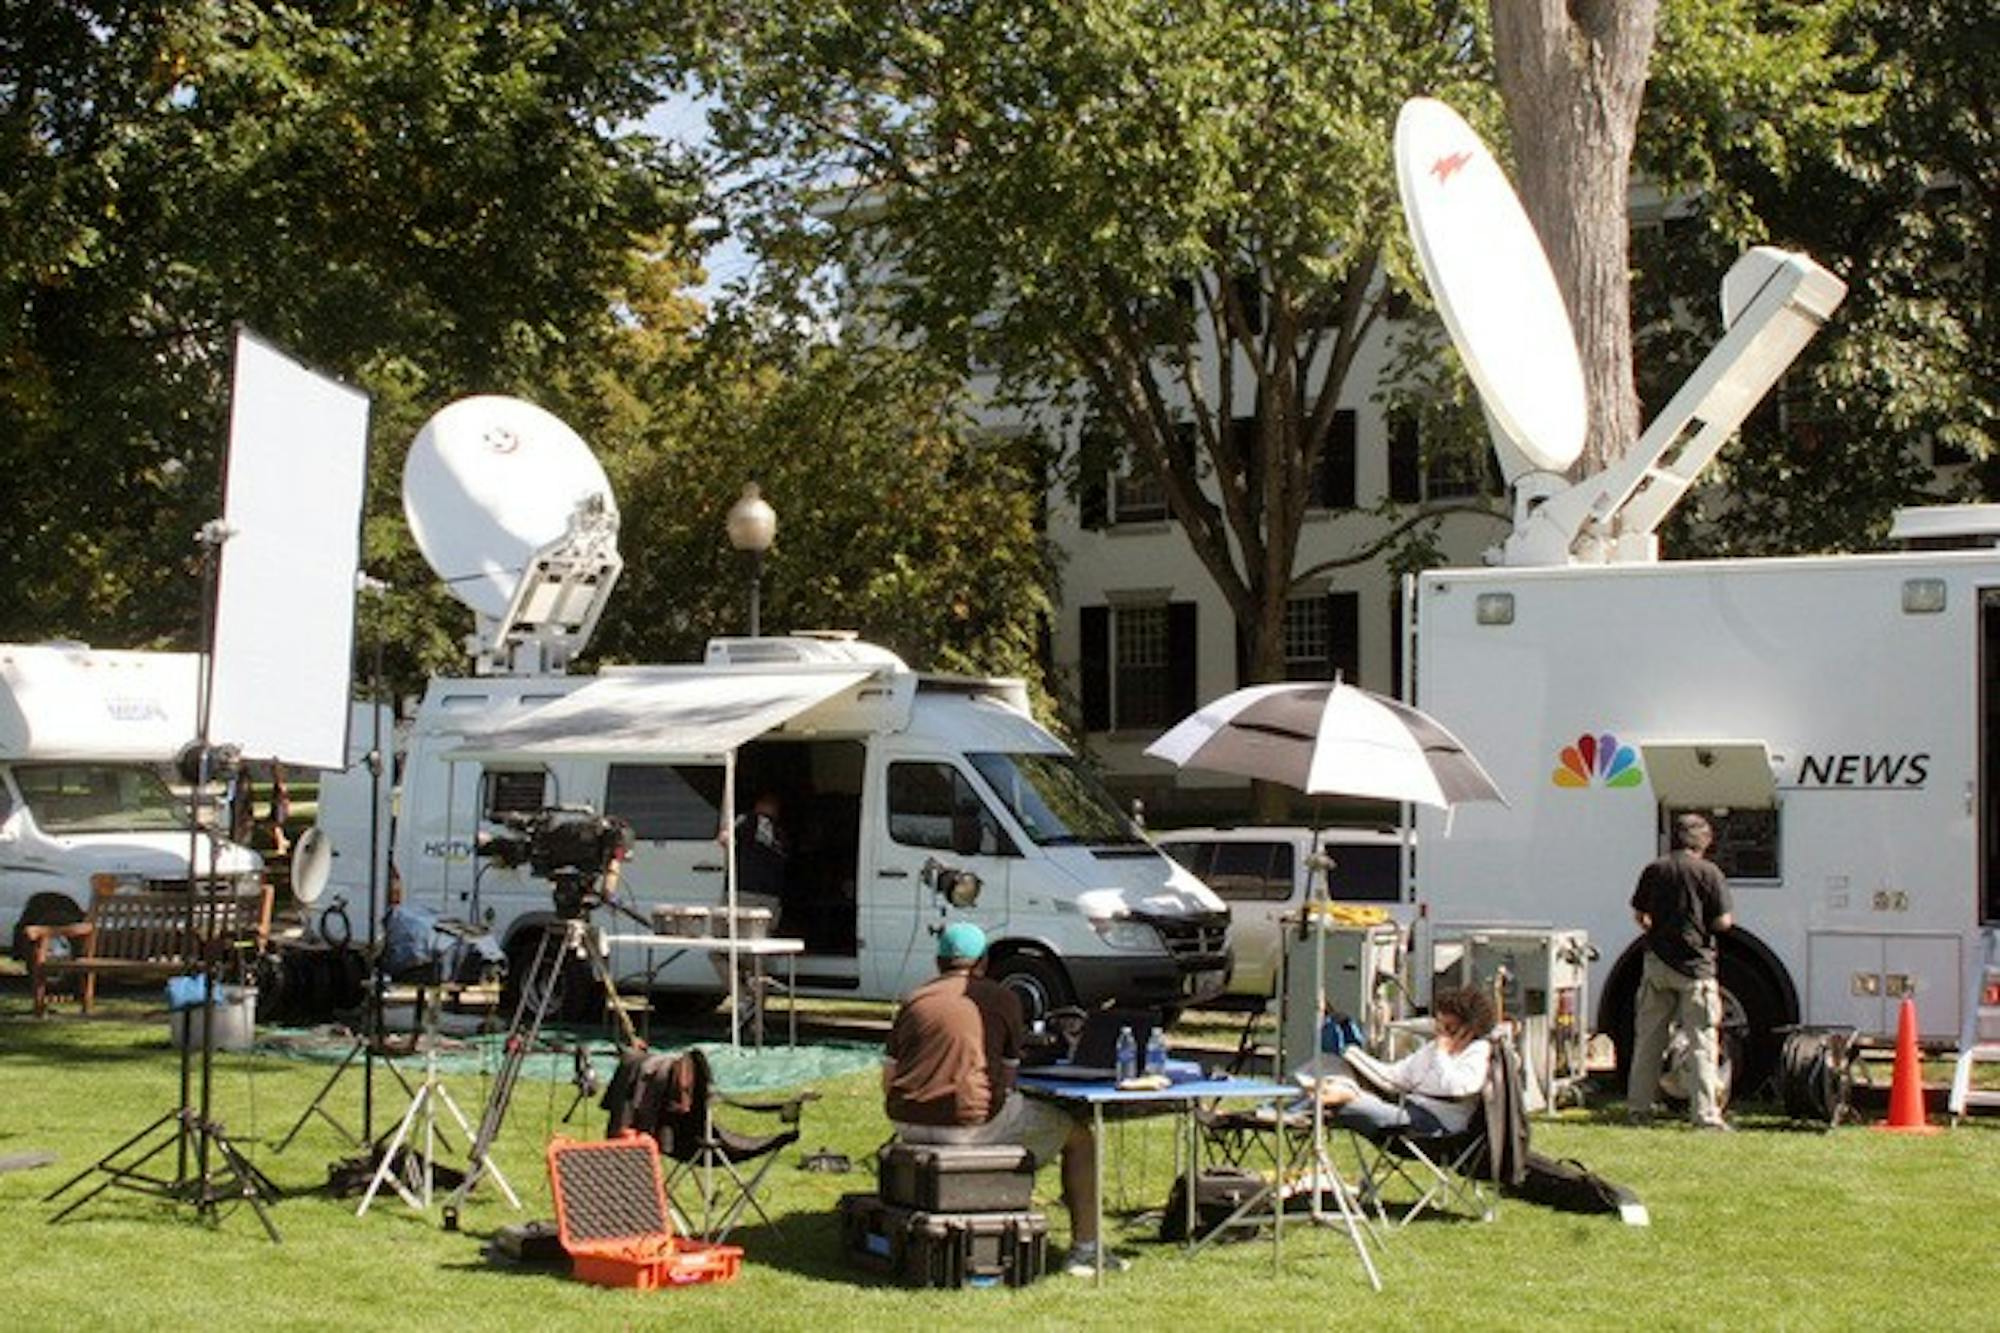 Media trucks line the east side of the Green Tuesday in preparation for Wednesday's presidential debate.